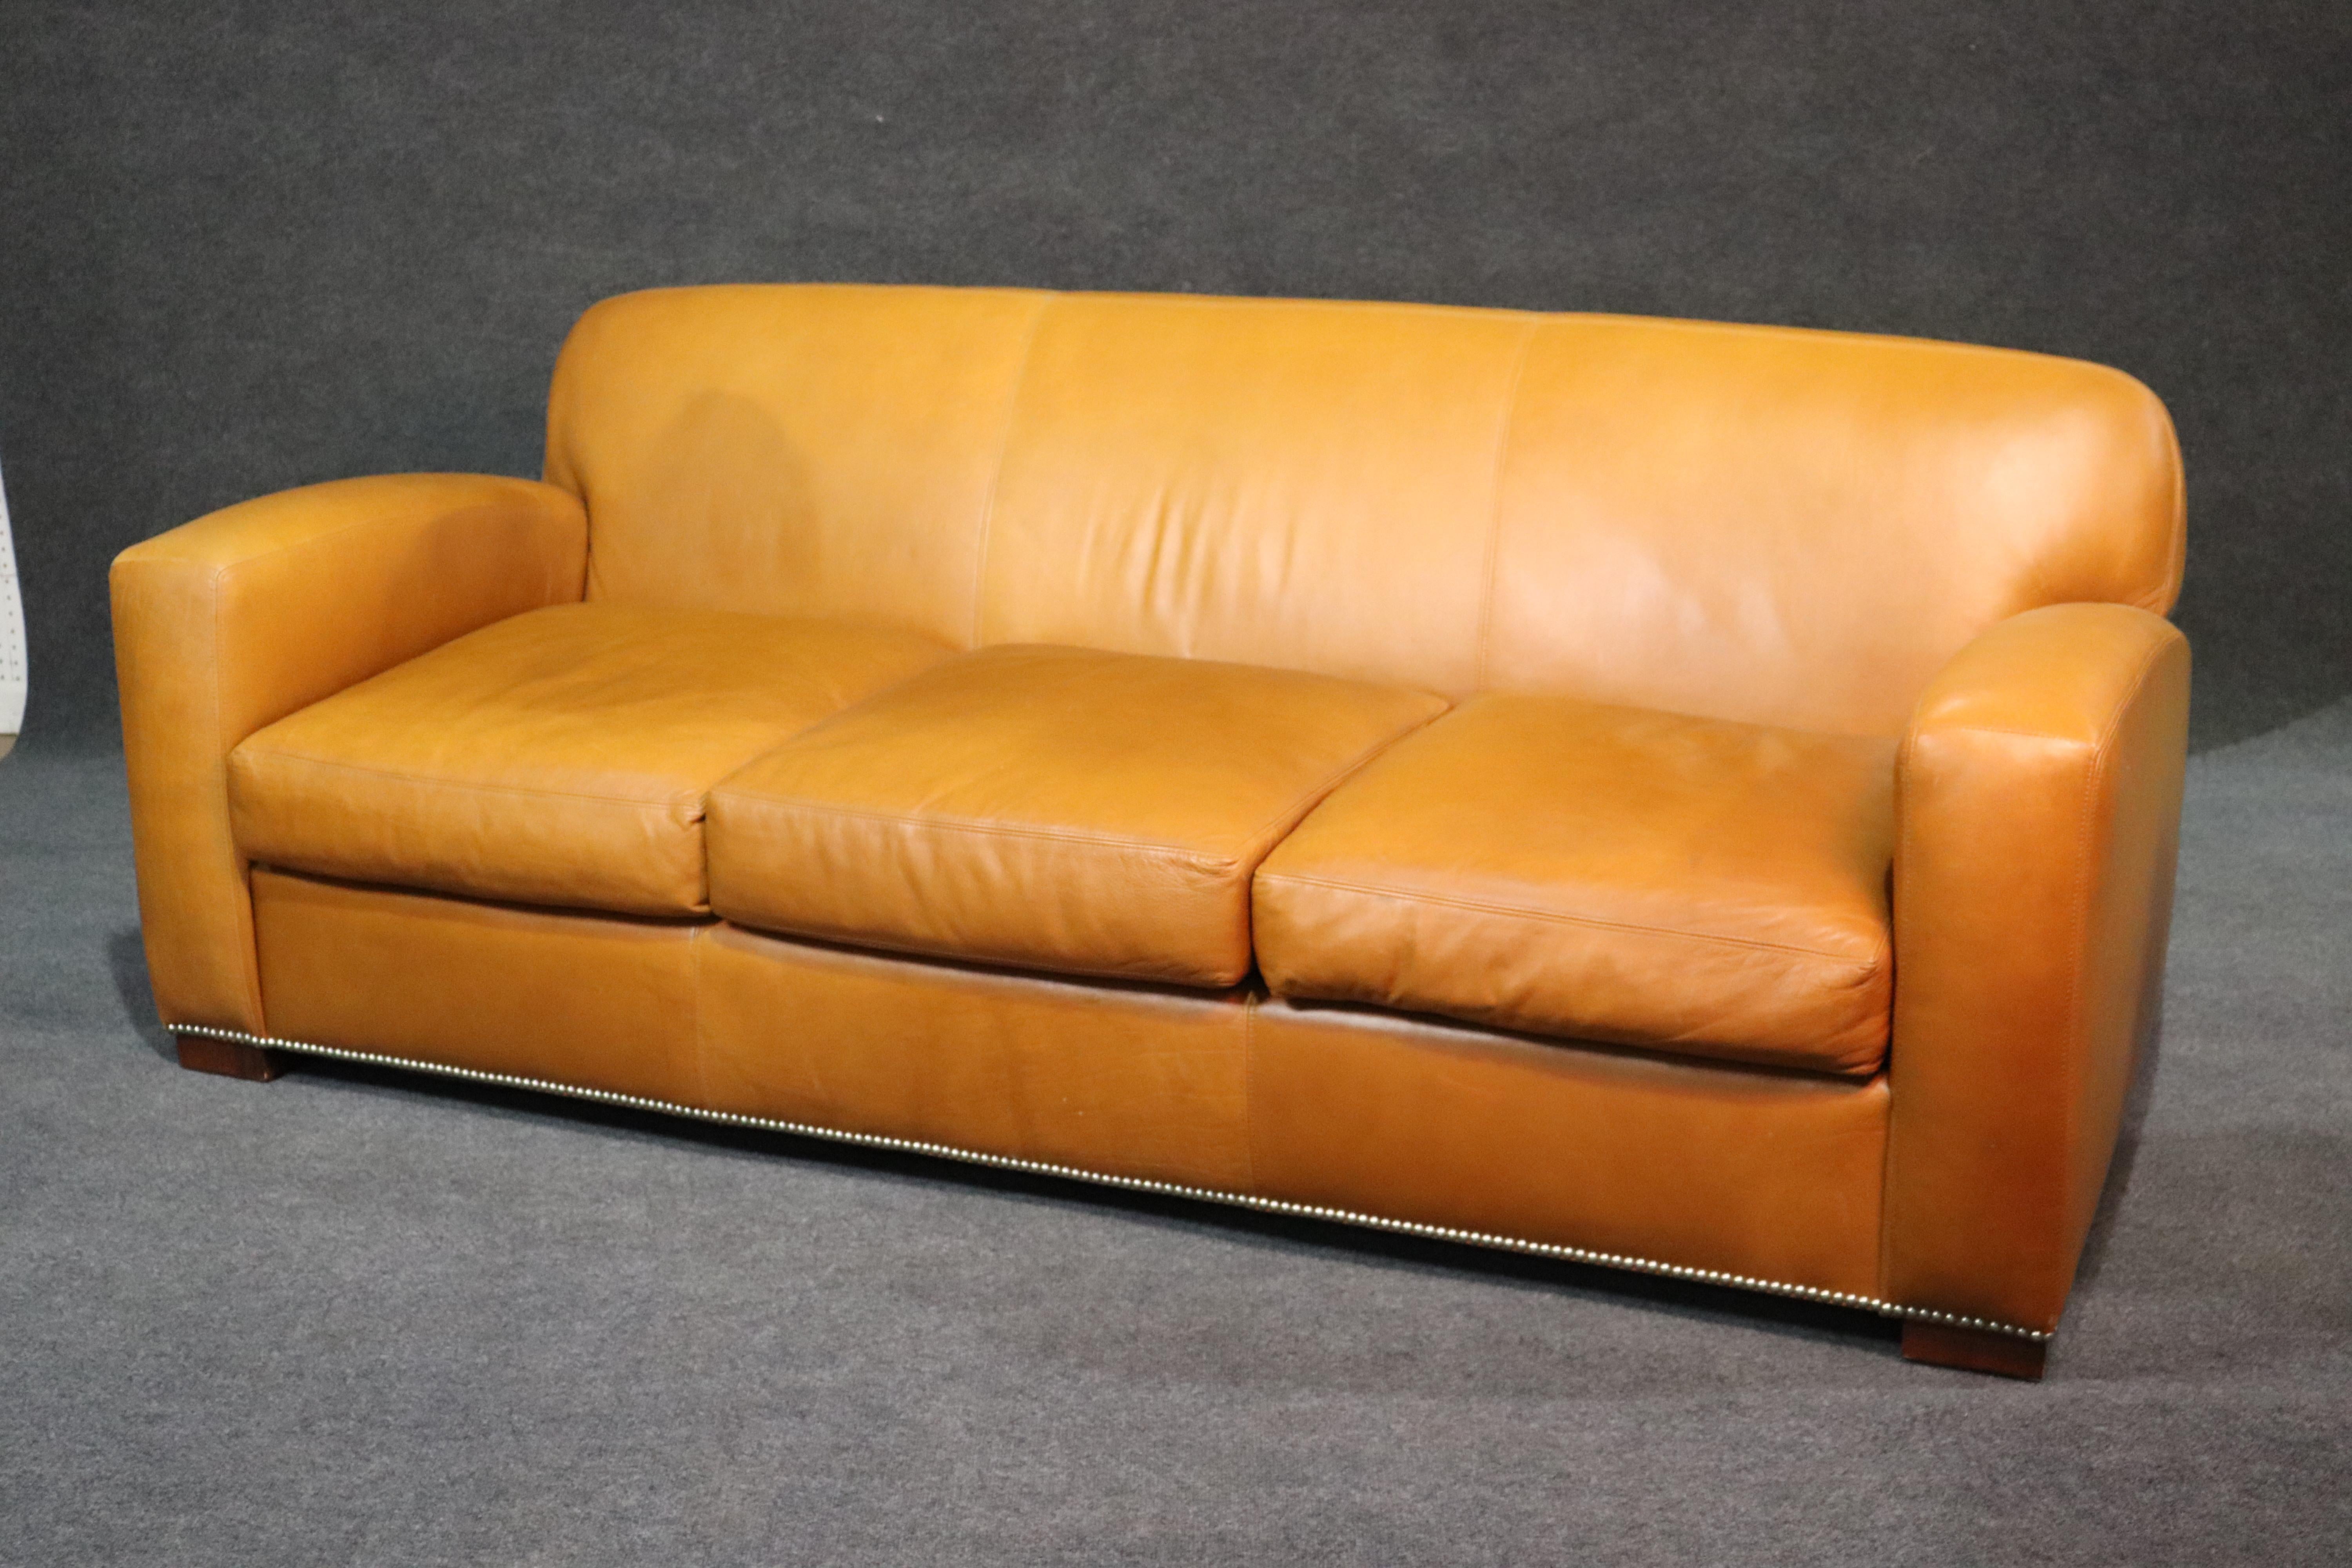 This is an exceptional Ralph Lauren Art deco style sofa. This very large and heavy sofa features beautiful apricot-hued leather and nailhead trim. The leather is in good vintage condition and while it does have some signs of age and use, is still